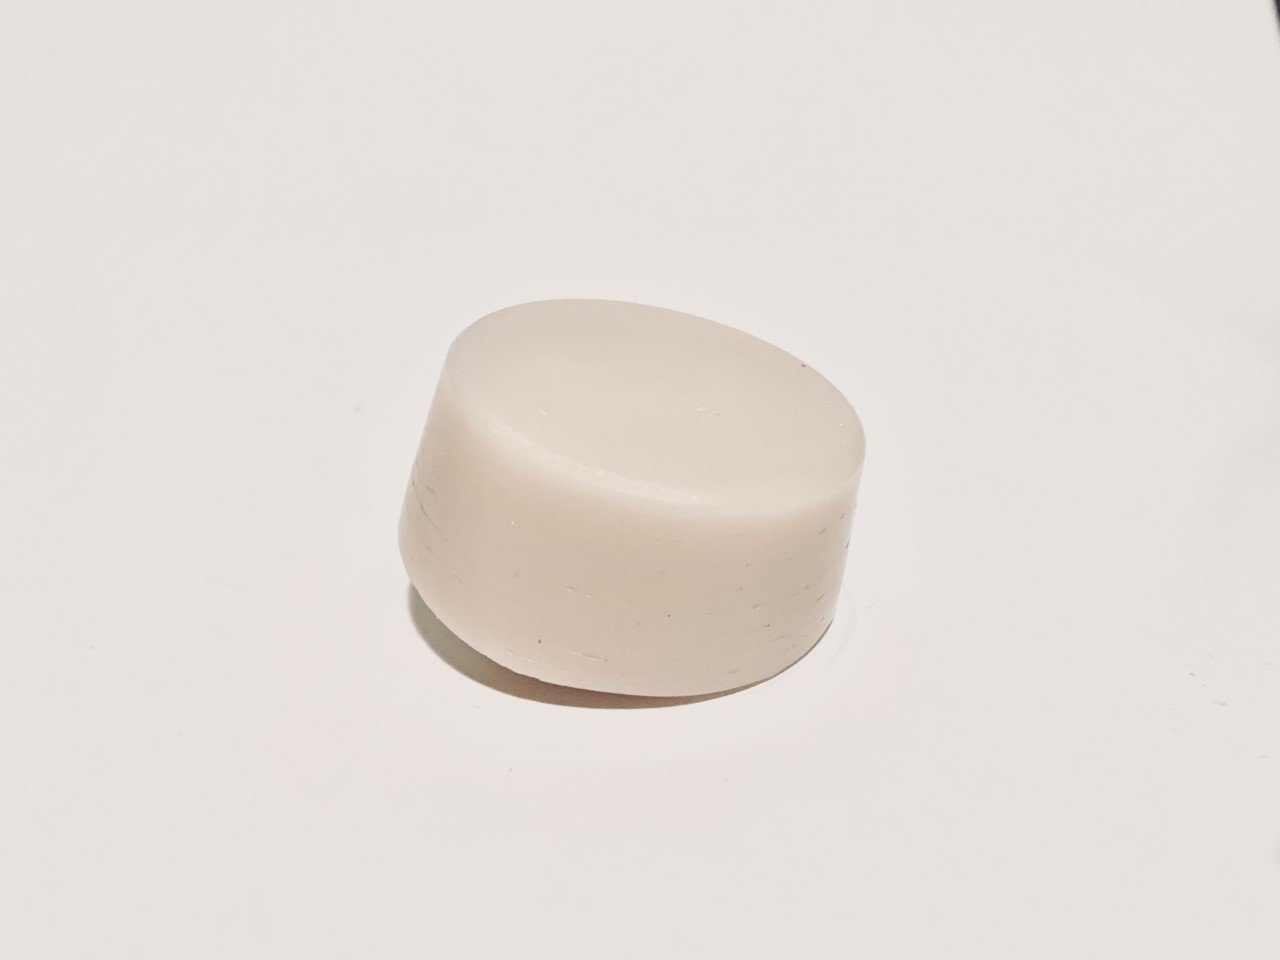 be YOU Conditioner Bar 45-50g - WHOLESALE be YOU - nelsonnaturals remineralizing toothpaste